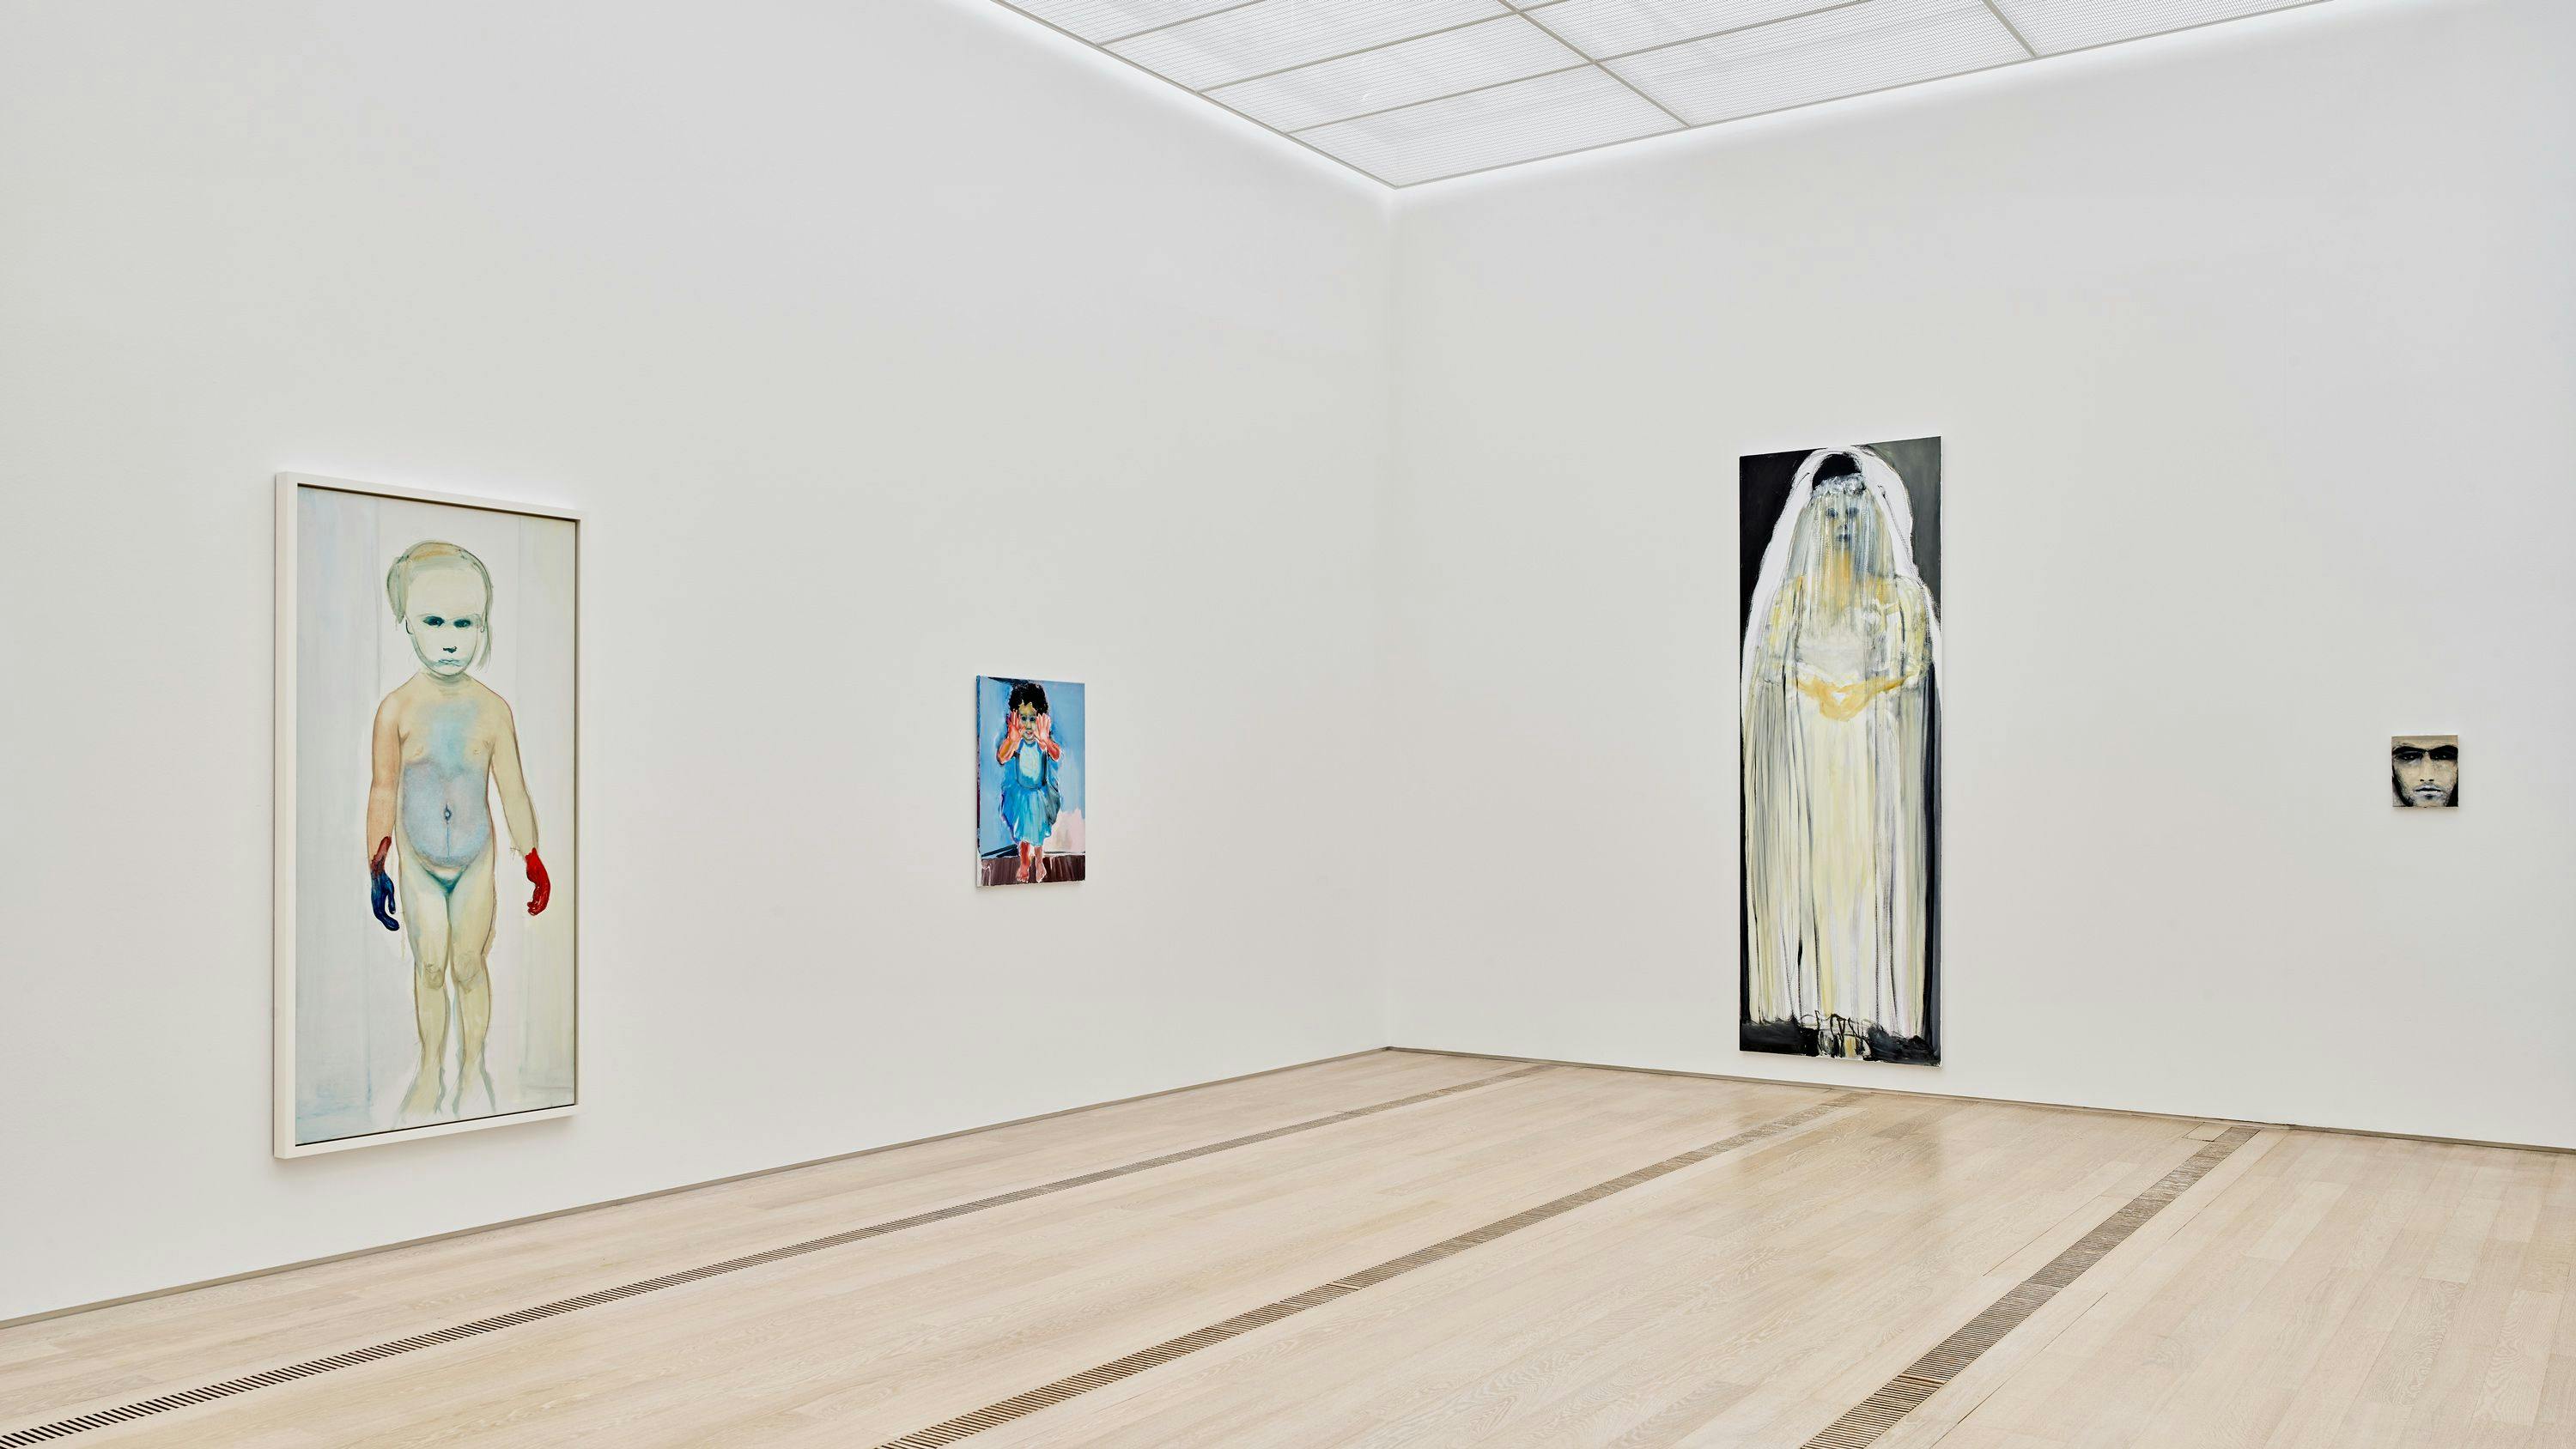 Installation view of the exhibition, CLOSE-UP, at Fondation Beyeler in Basel, dated 2021.